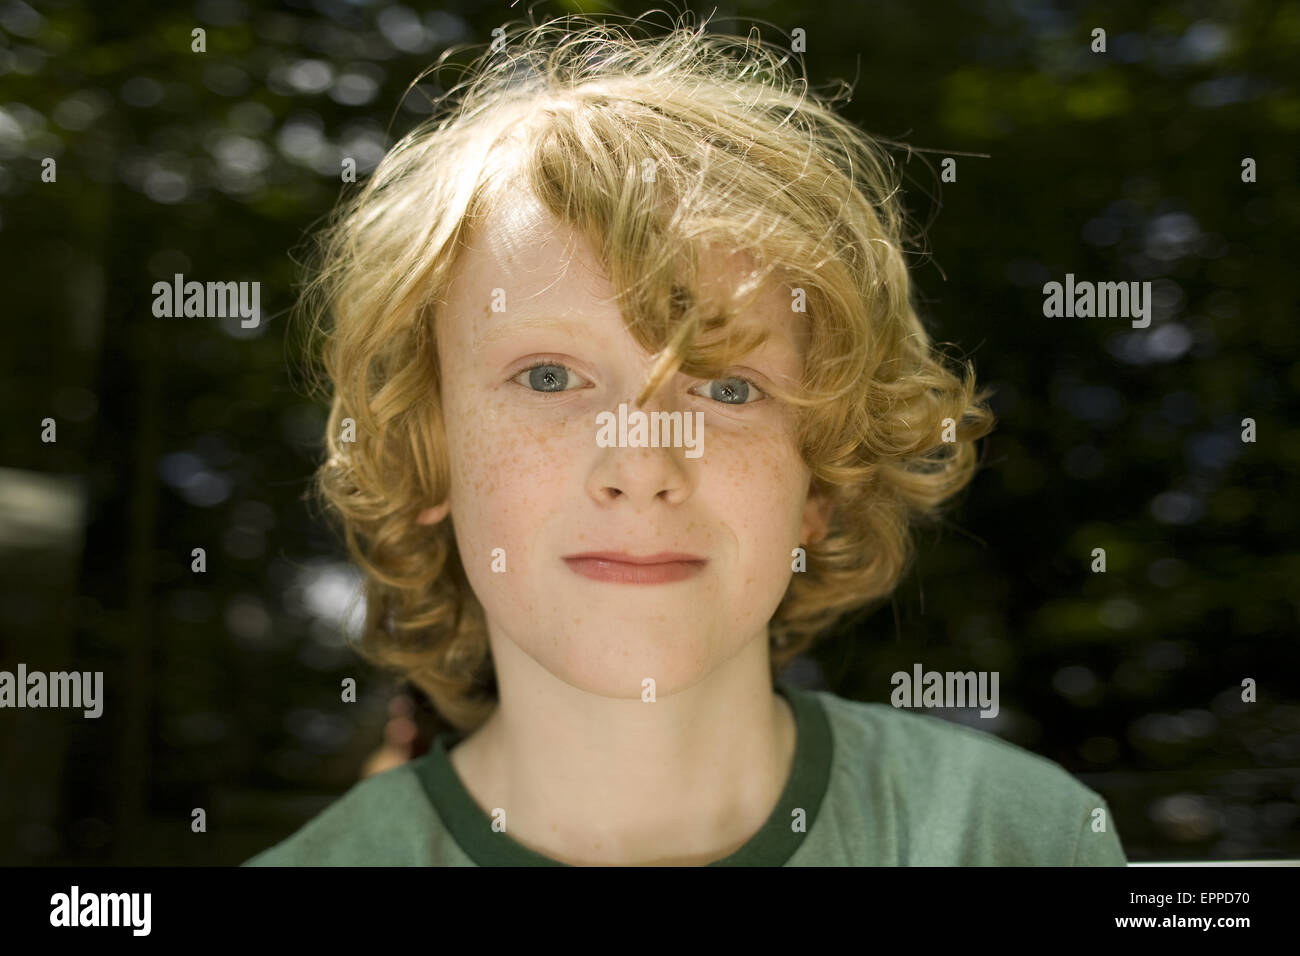 A young boy with red hair , age 8-10, looks into the camera smiling ...